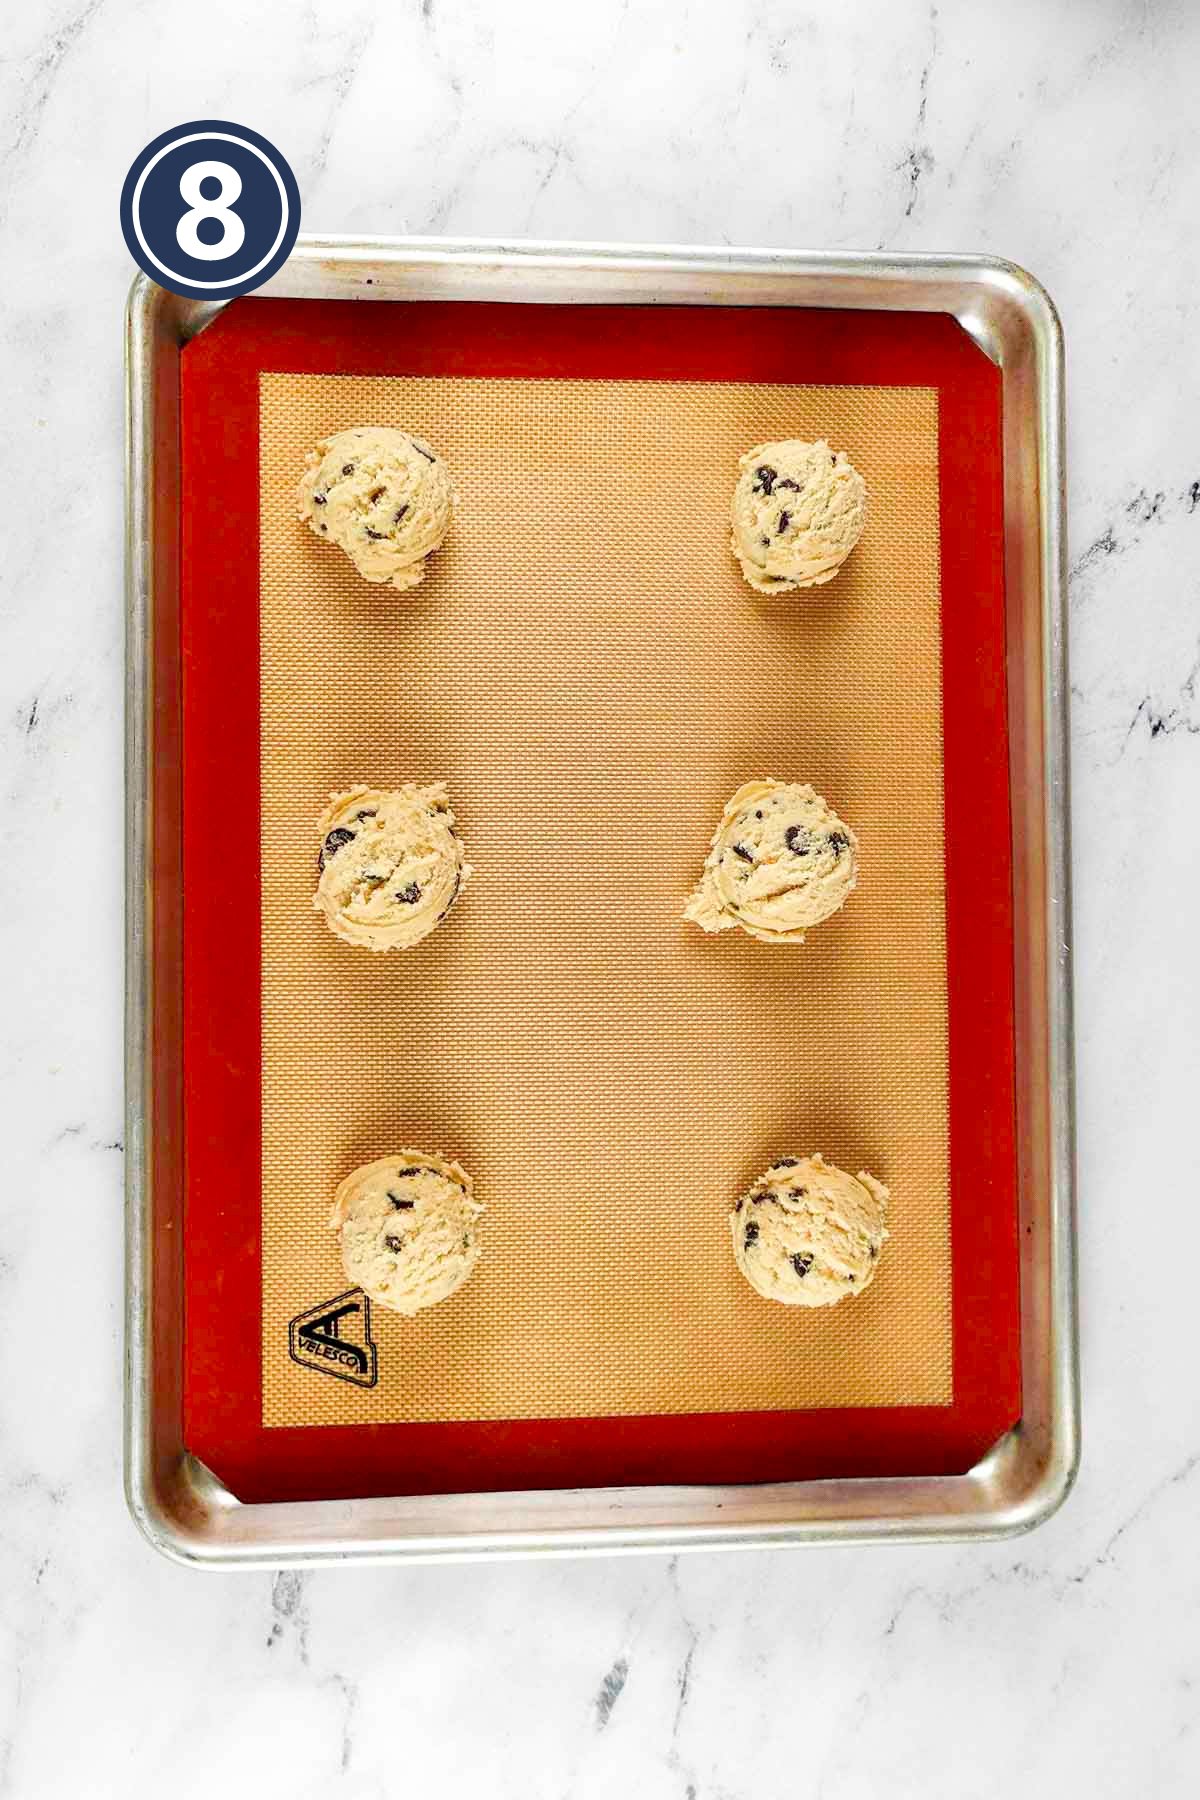 six scooped out chocolate chip cookies placed over silicone mat in a baking tray.